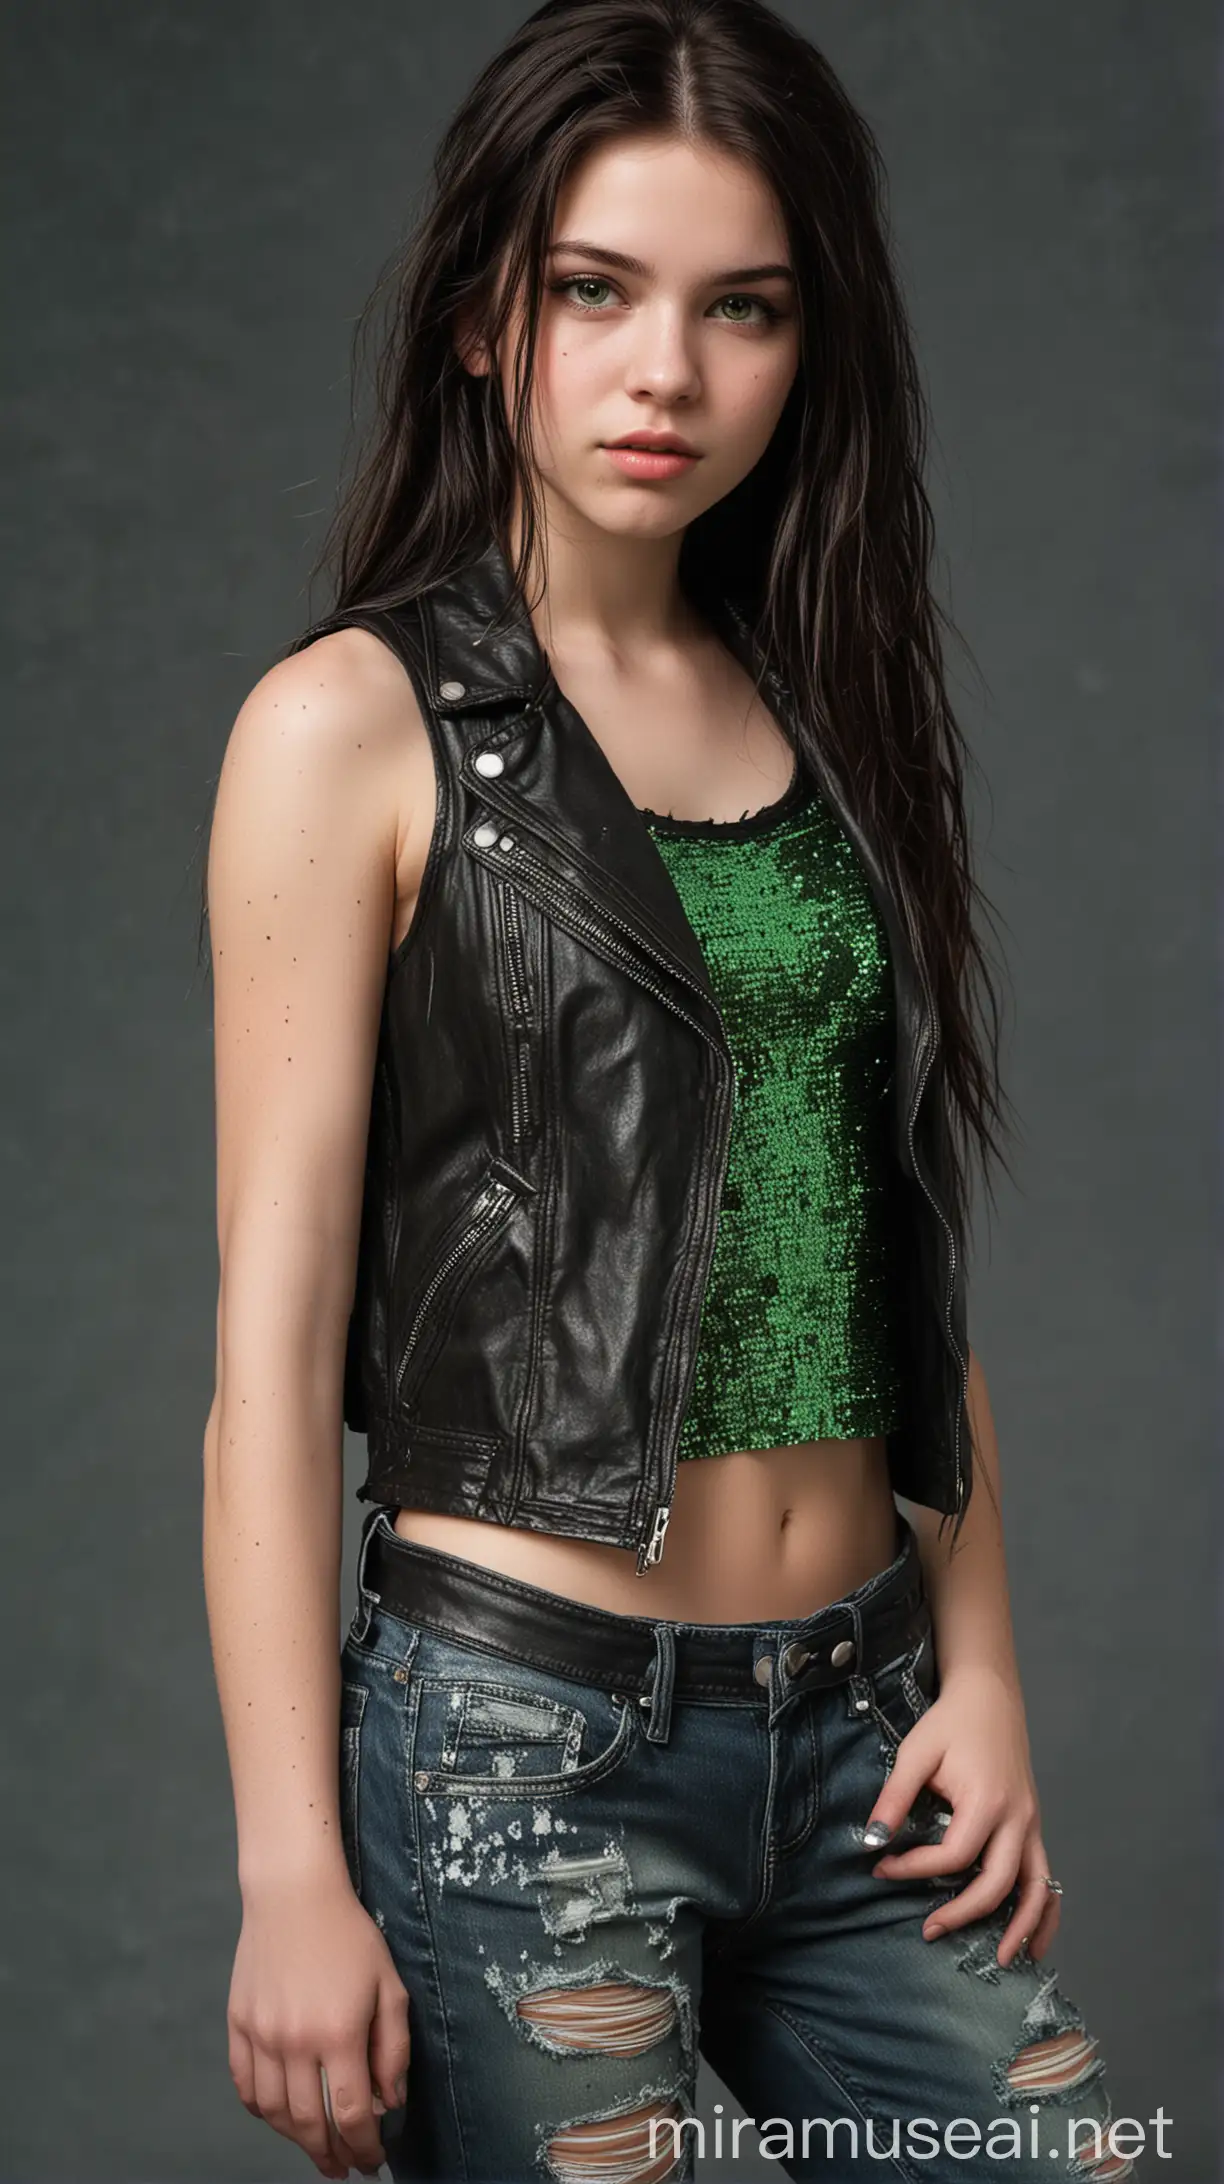 A 17-year-old white-skinned woman. She had long, straight dark brunette hair with green highlights and brown eyes. She wore a green sequin tank top with a black sleeveless leather jacket over the top and ripped jeans. She seemed to emanate an calm and distrustful aura. Full-body model.